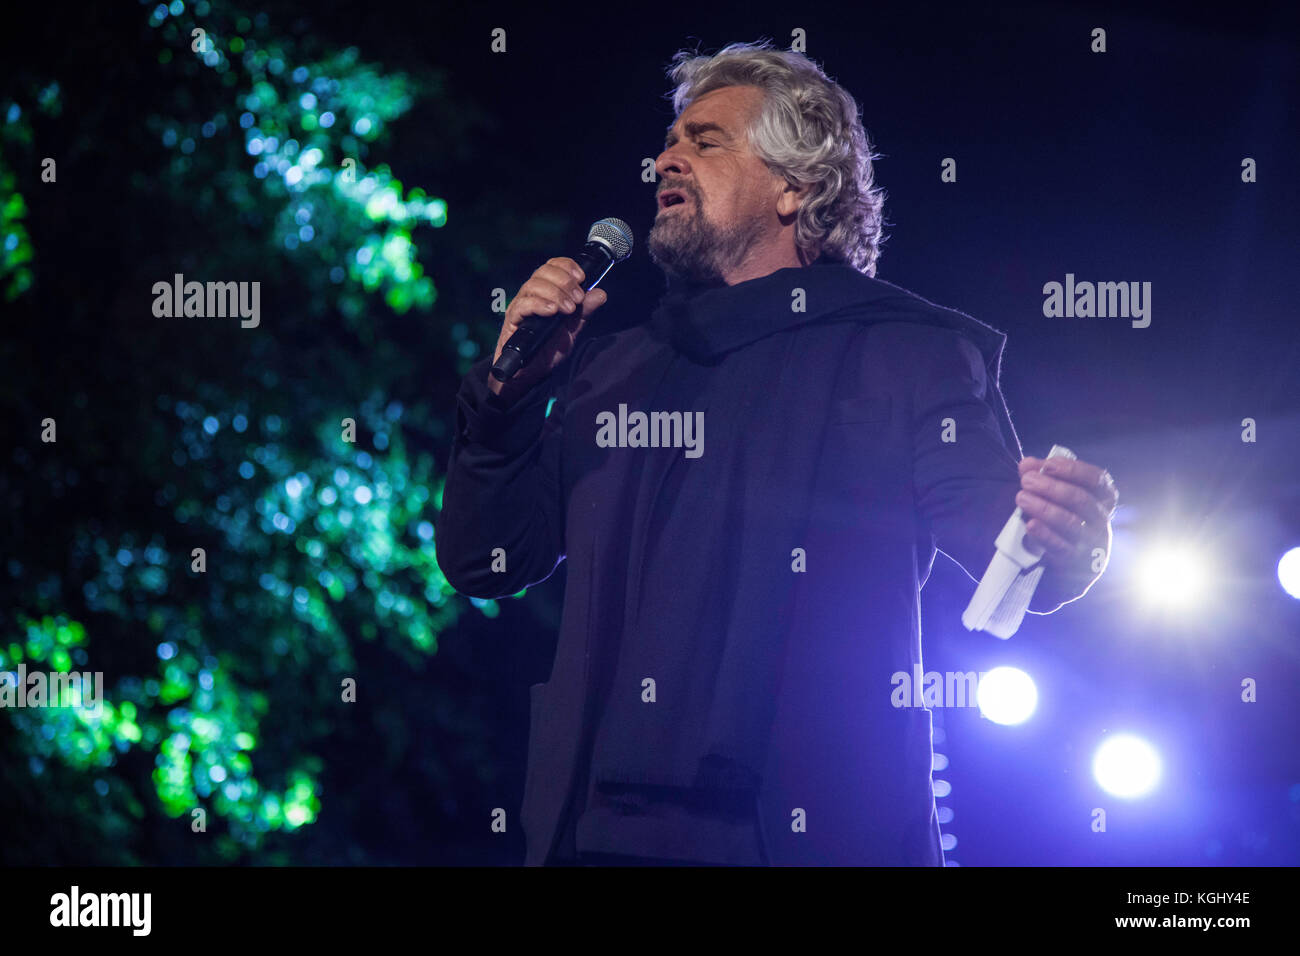 Beppe Grillo, political leader of the Five Stars Movement (M5S), speaks during a political rally before the Sicilian elections in Palermo (Italy). Stock Photo